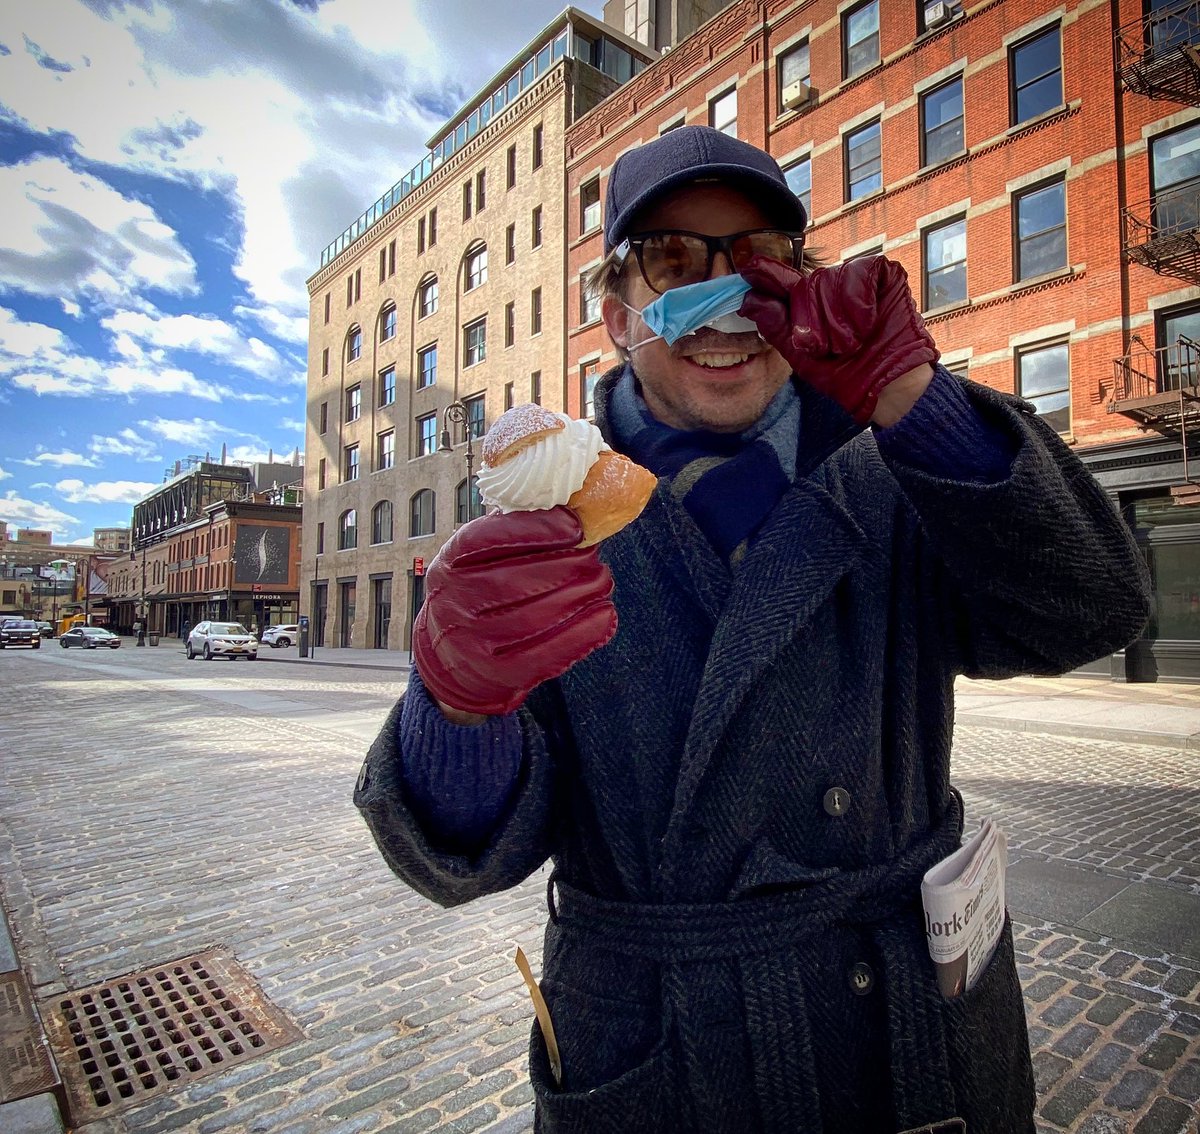 Nothing stops @EkonomiGabriel from having his beloved semla. Not a facemask or the fact that he is in New York.